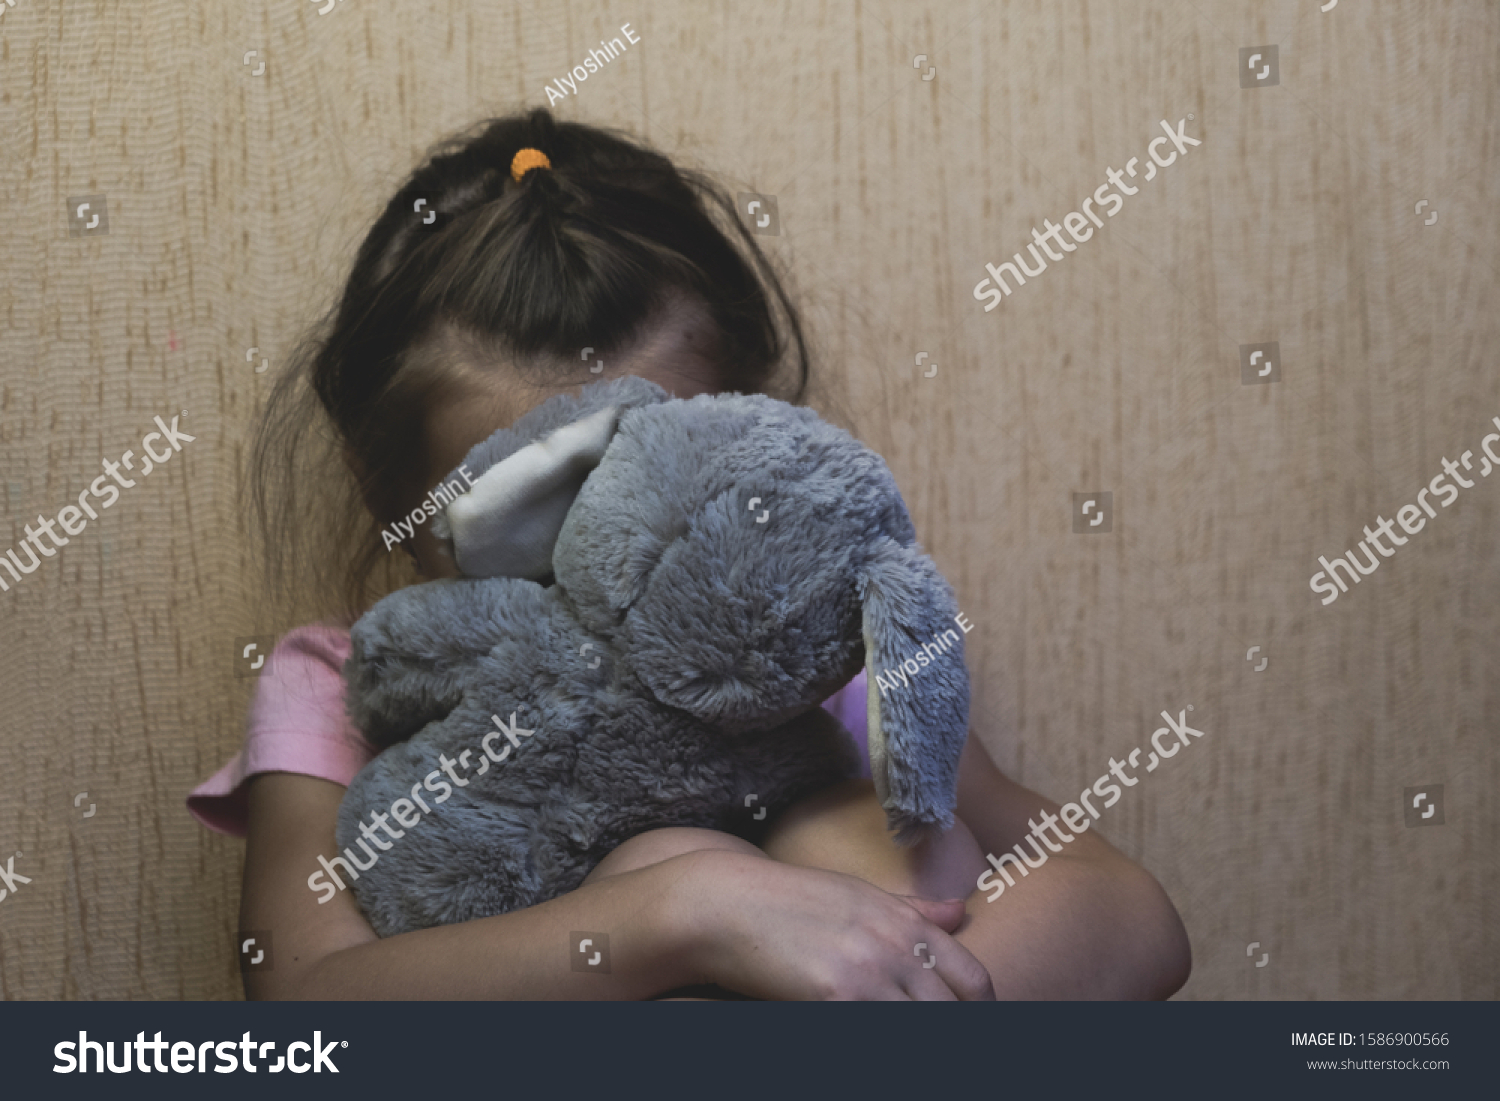 Depressed child sitting and hidden behind her toy teddy bear. domestic and violence, beaten sitting at the wall, Domestic violence. Copy space. #1586900566